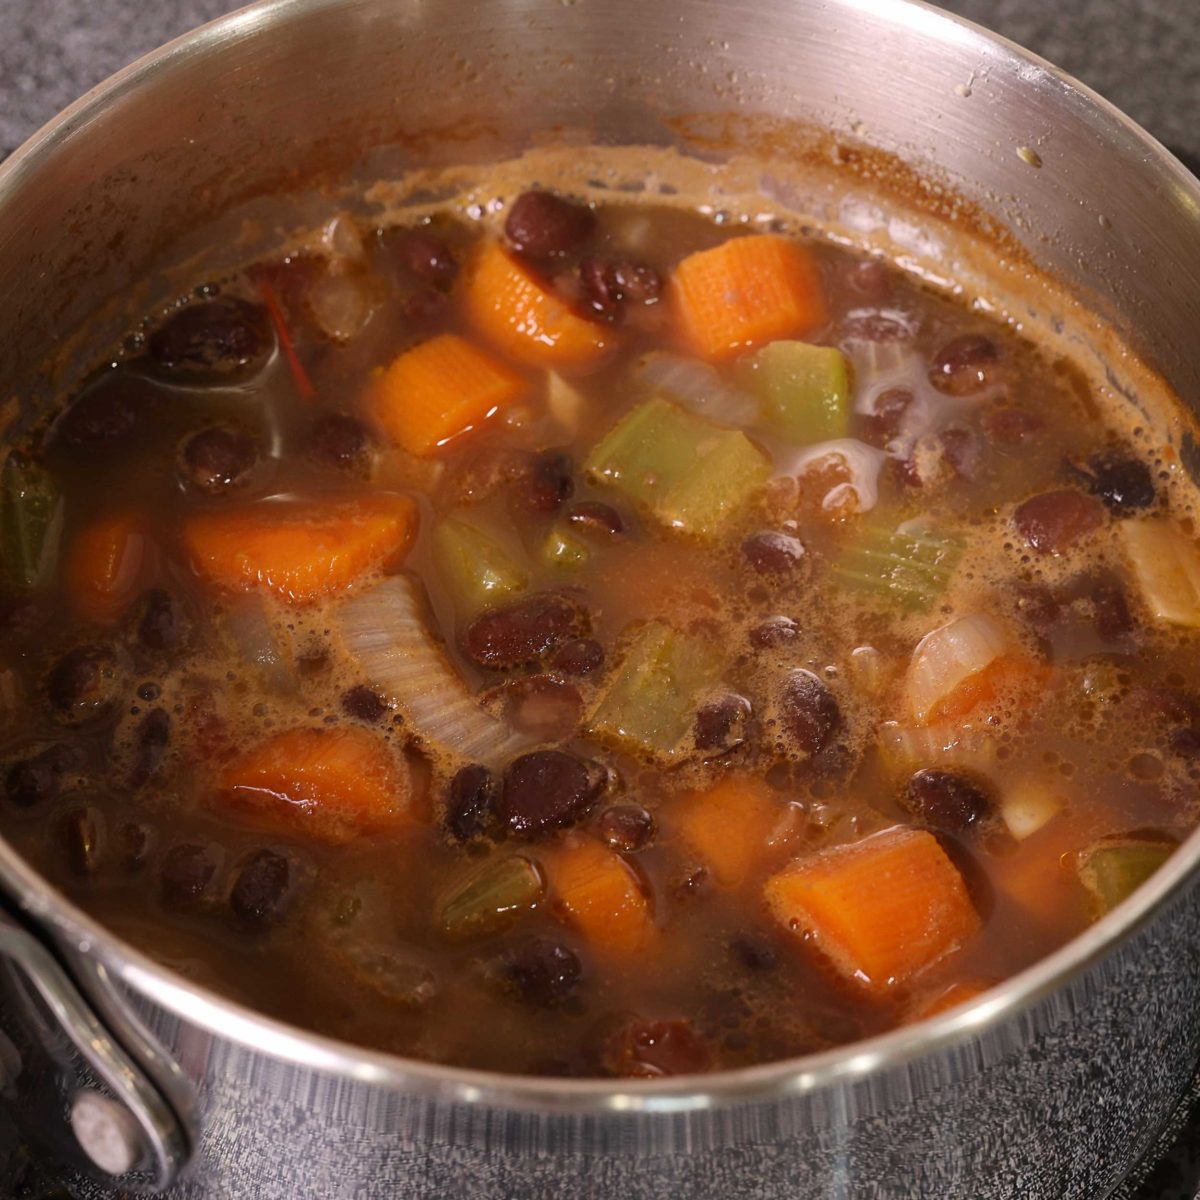 soup simmering on the stove with carrots, black beans, celery, onions, and broth in the pot.